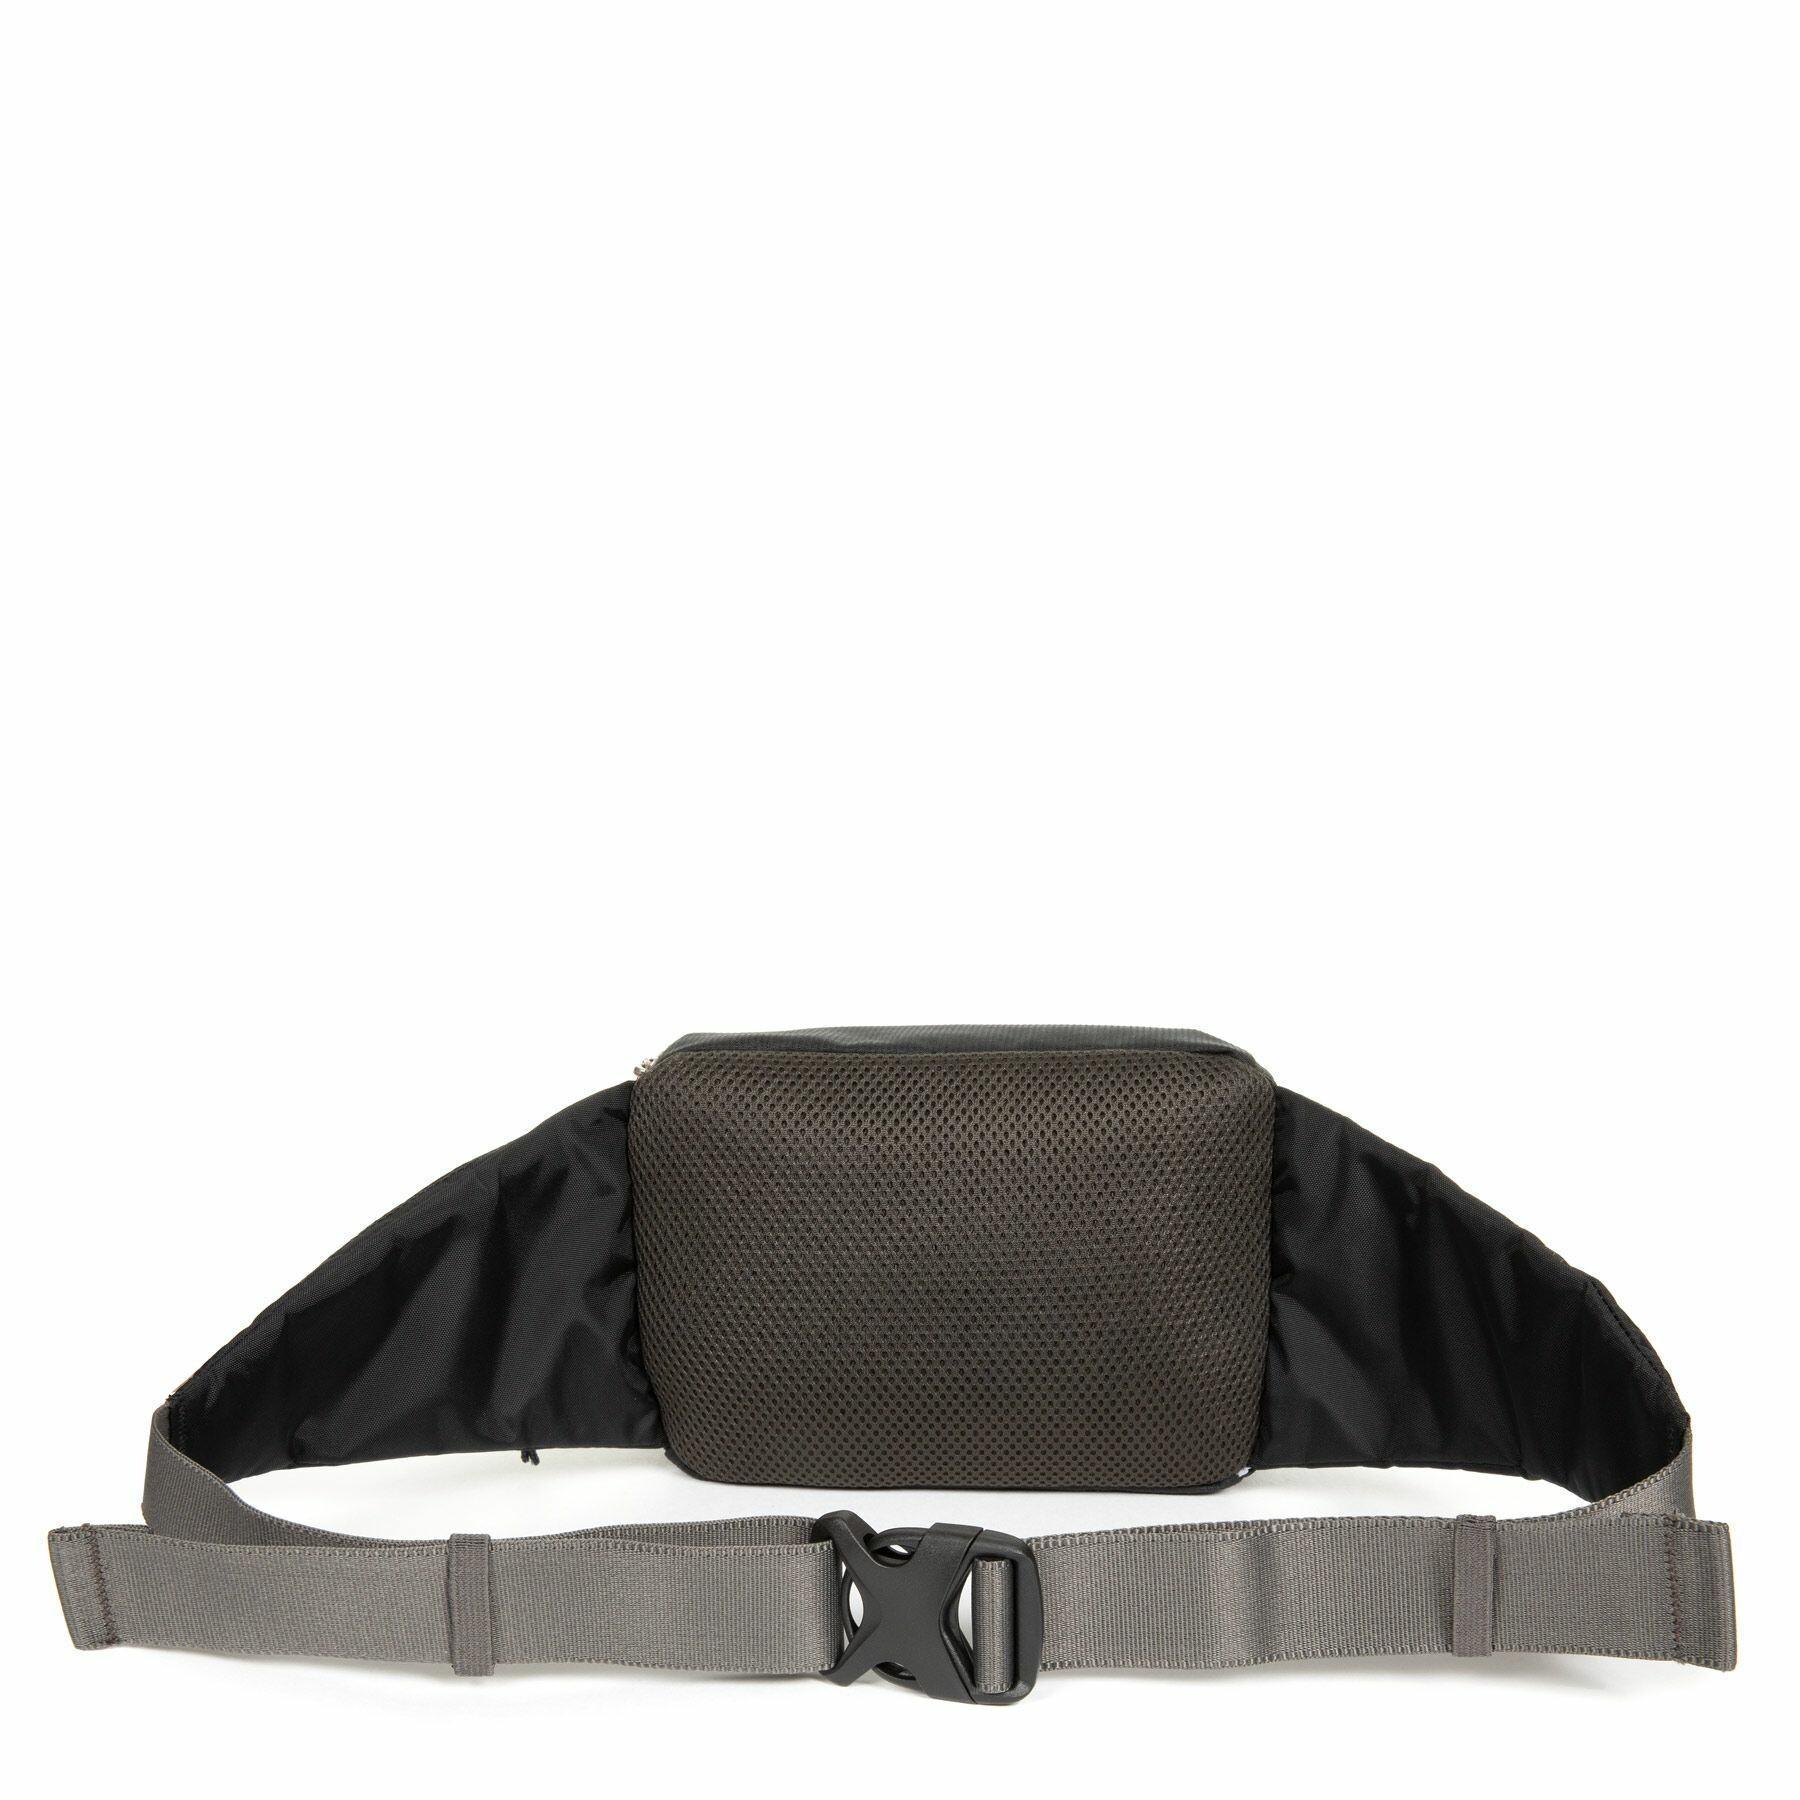 National Geographic 5l fanny pack